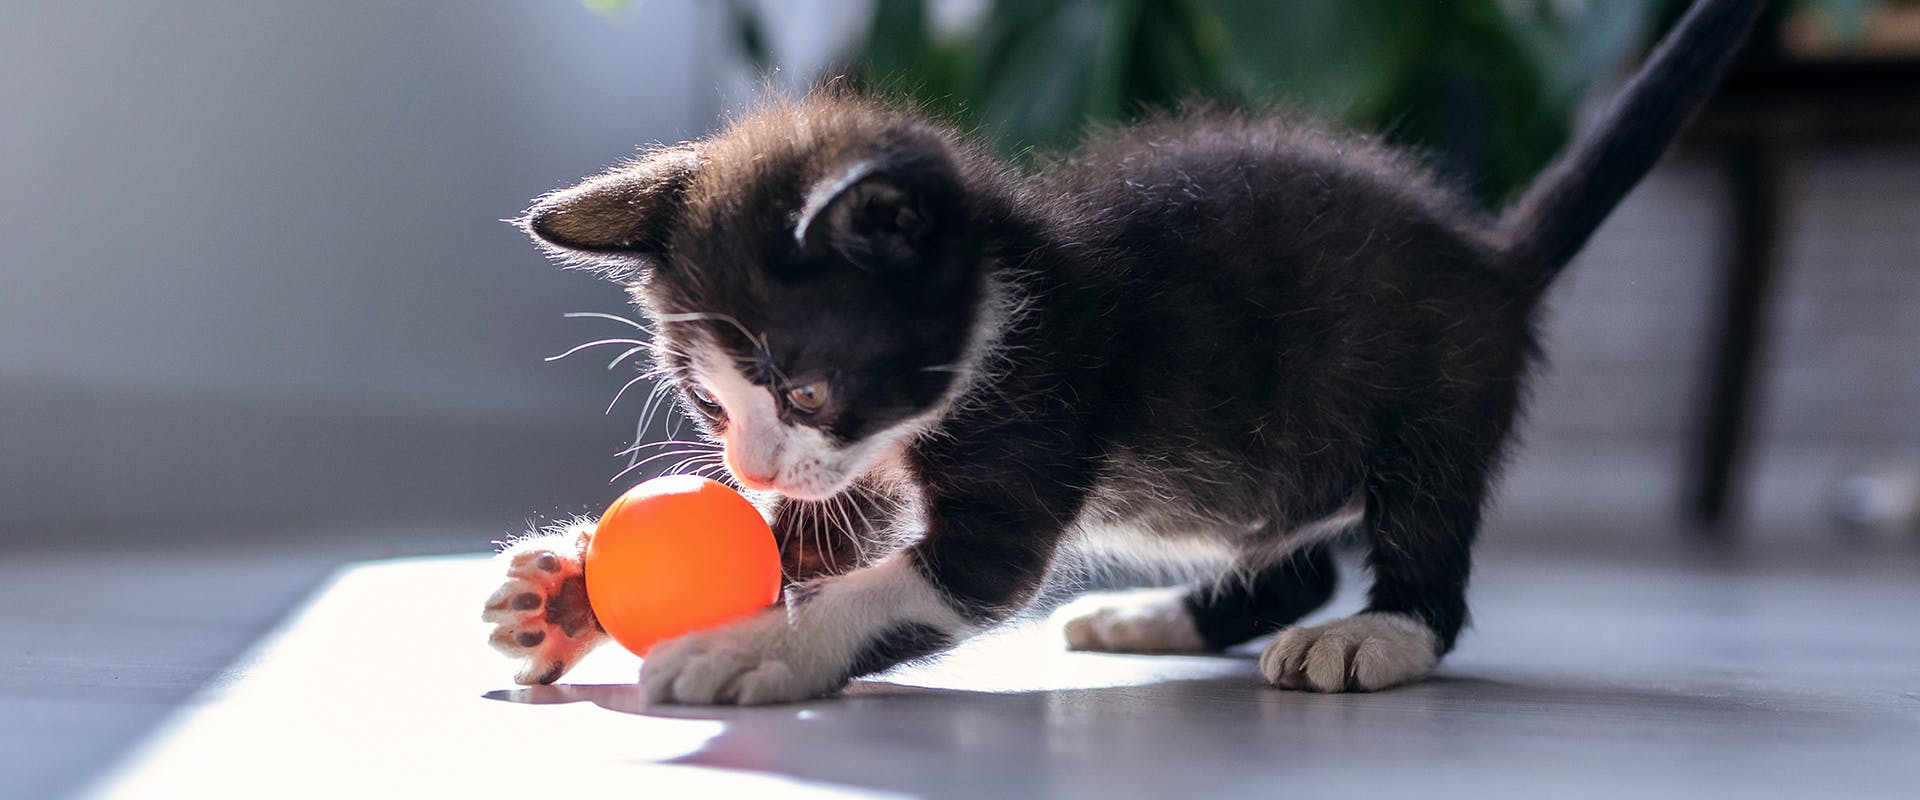 Tuxedo cat names - a cute black and white kitten playing with an orange ball